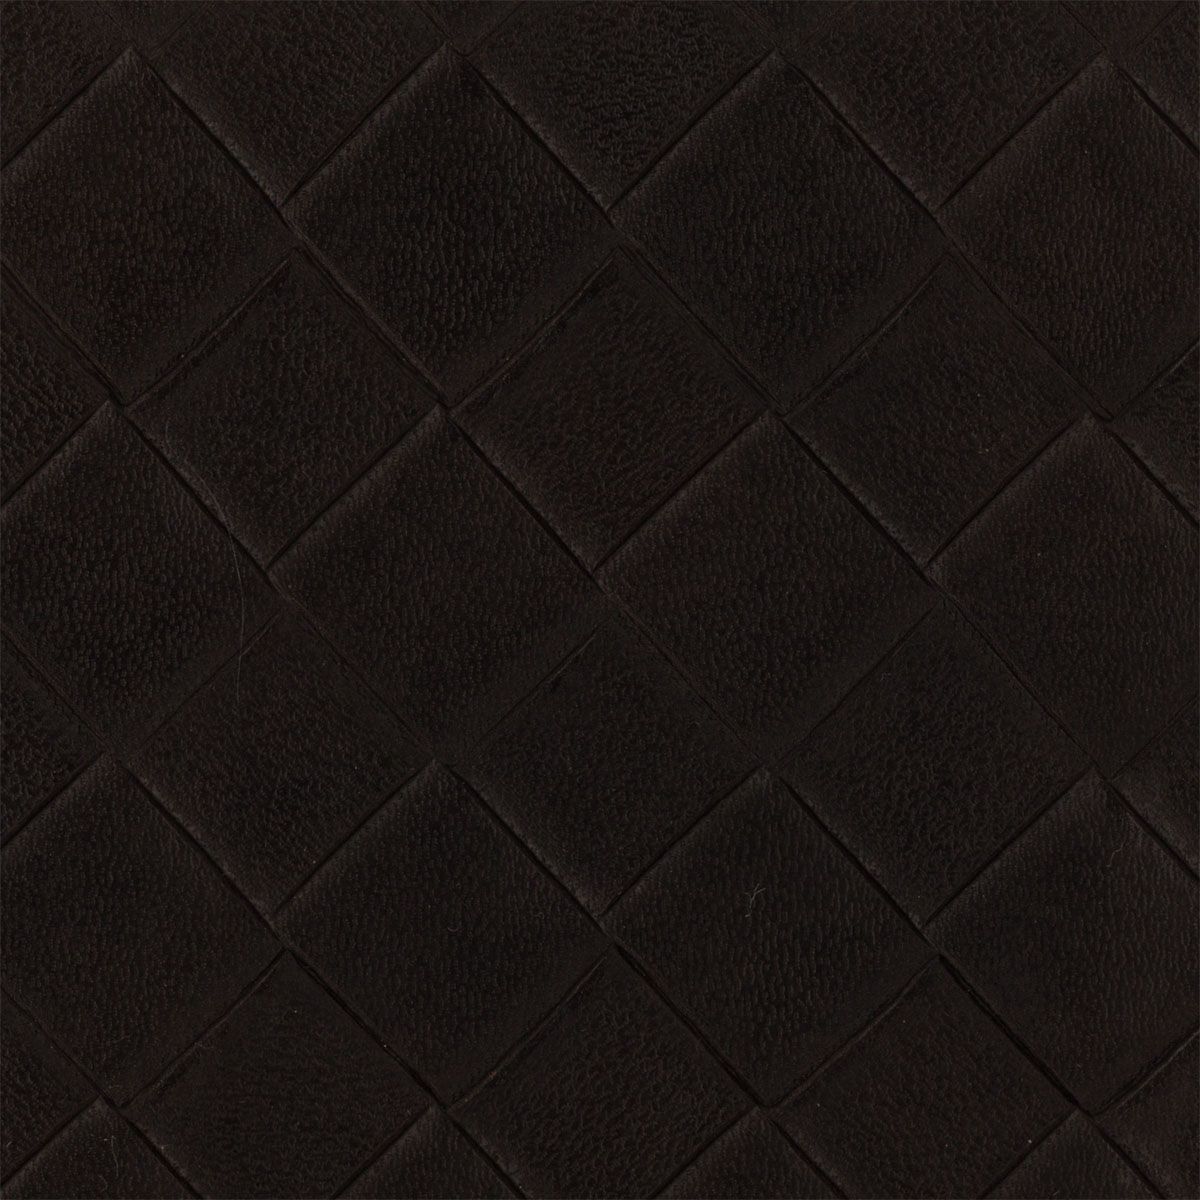 Four Corners fabric in espresso color - pattern number GU 44301474 - by Scalamandre in the Old World Weavers collection